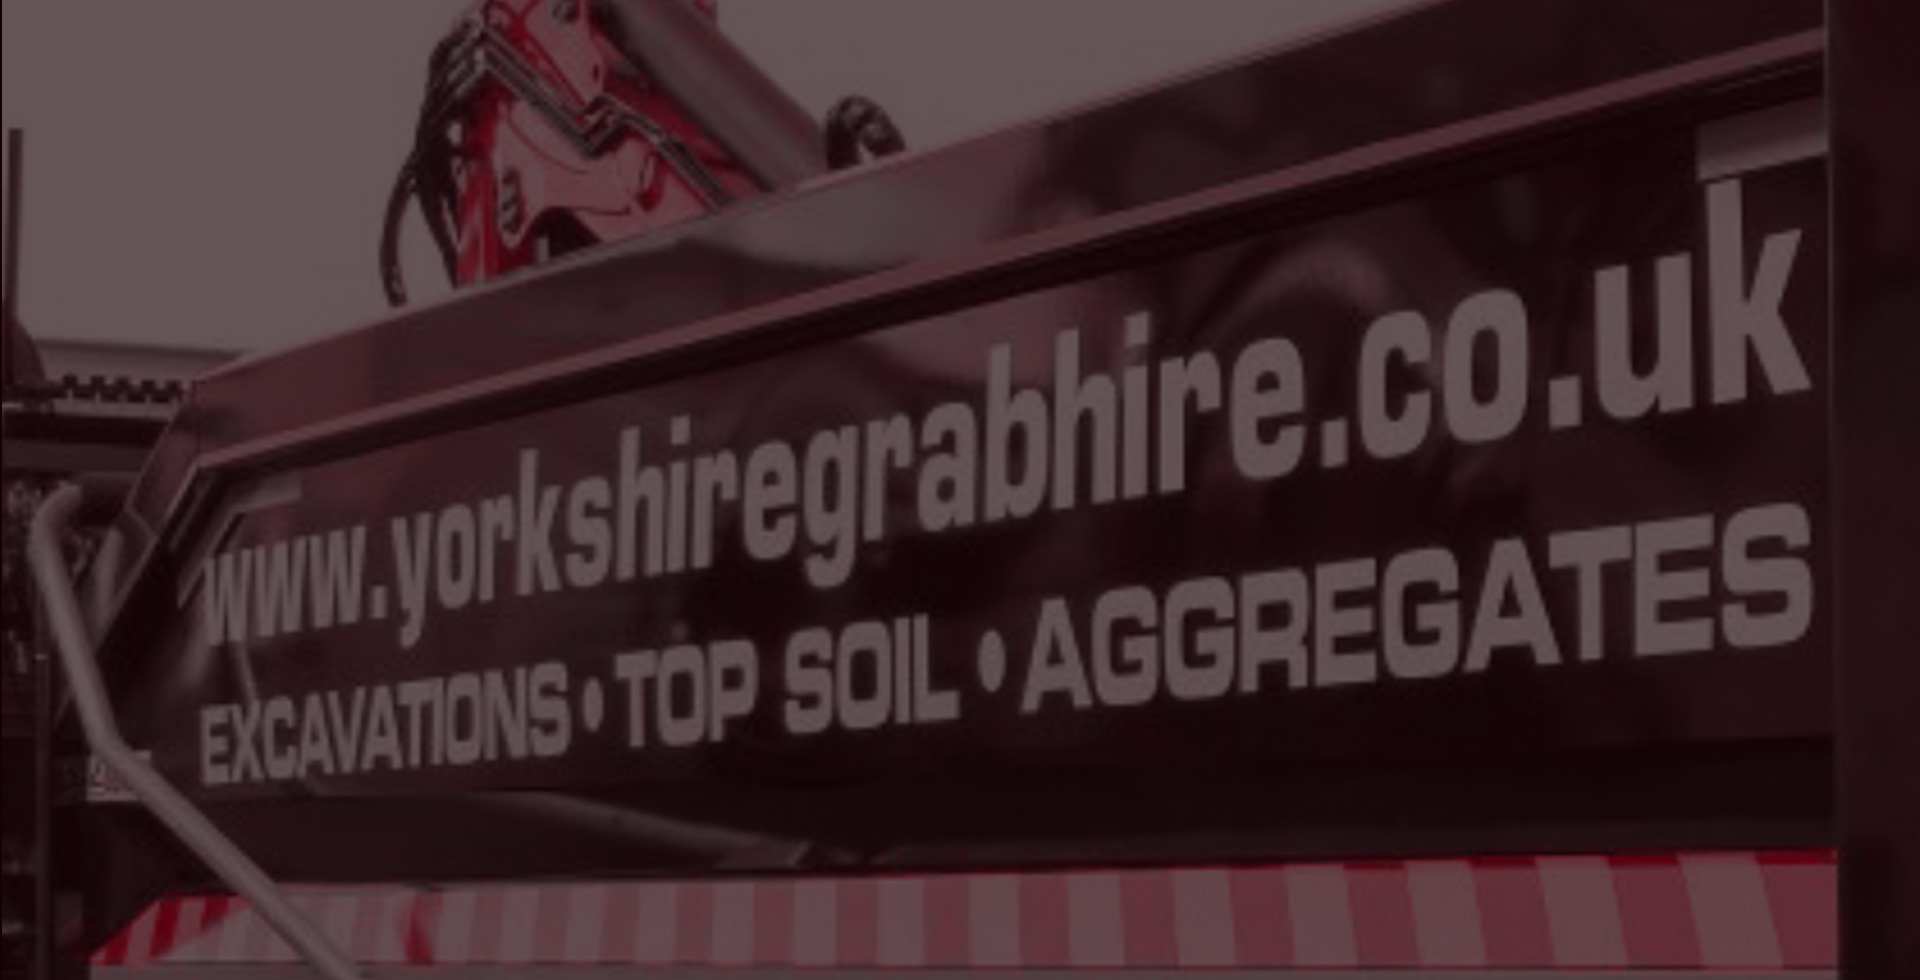 Yorkshire Grab Hire :: t: 01924  480992. Providing Grab Hire services throughout Yorkshire. We collect and dispose of all types of soil, rubbish, rubble, trees, plant cuttings
 and other waste material from your site. We do this using eco-friendly, yet cost effective methods.